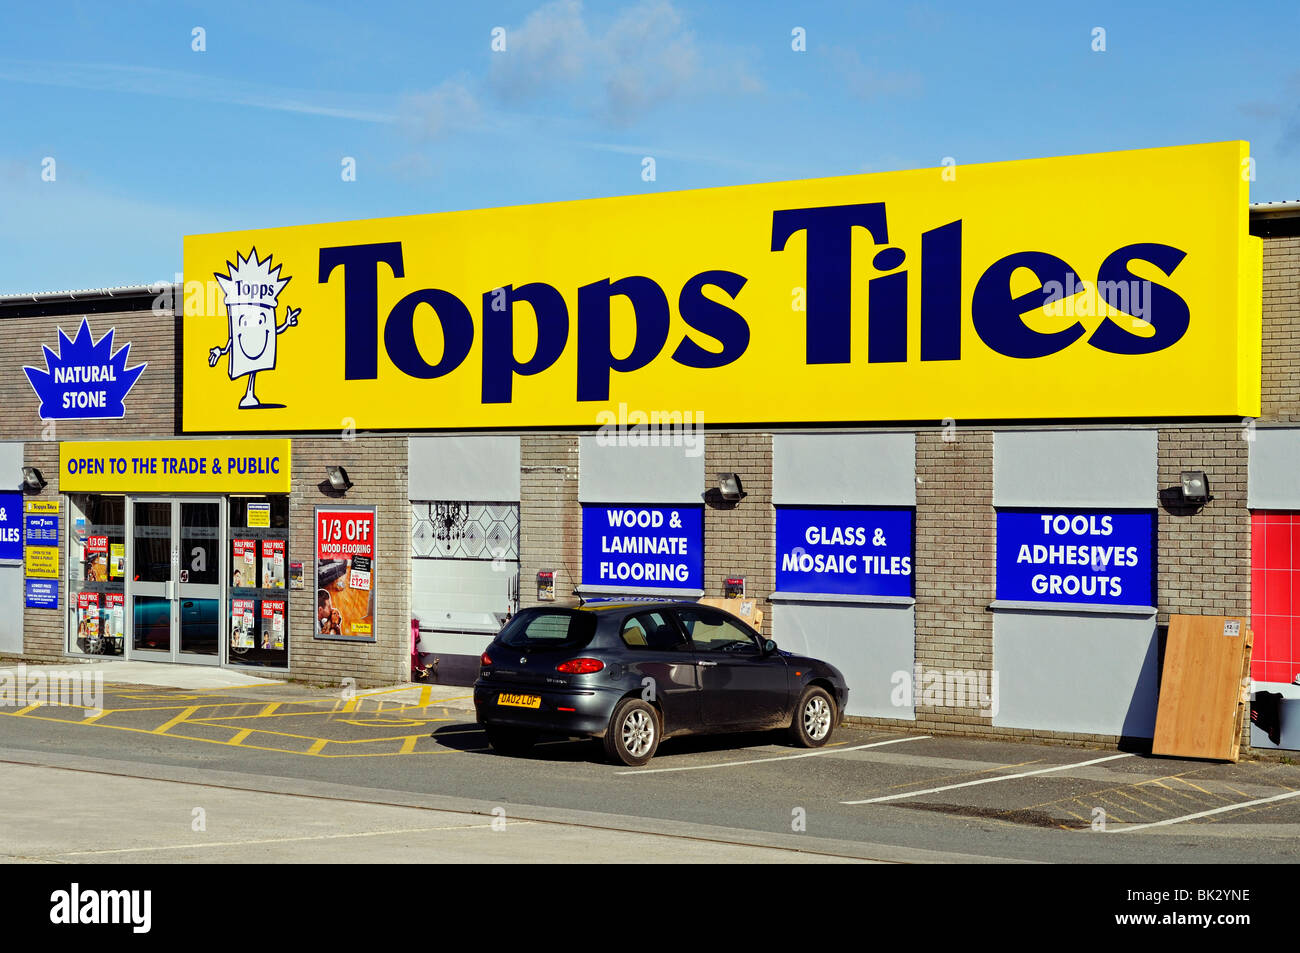 Topps tiles hi-res stock photography images - Alamy